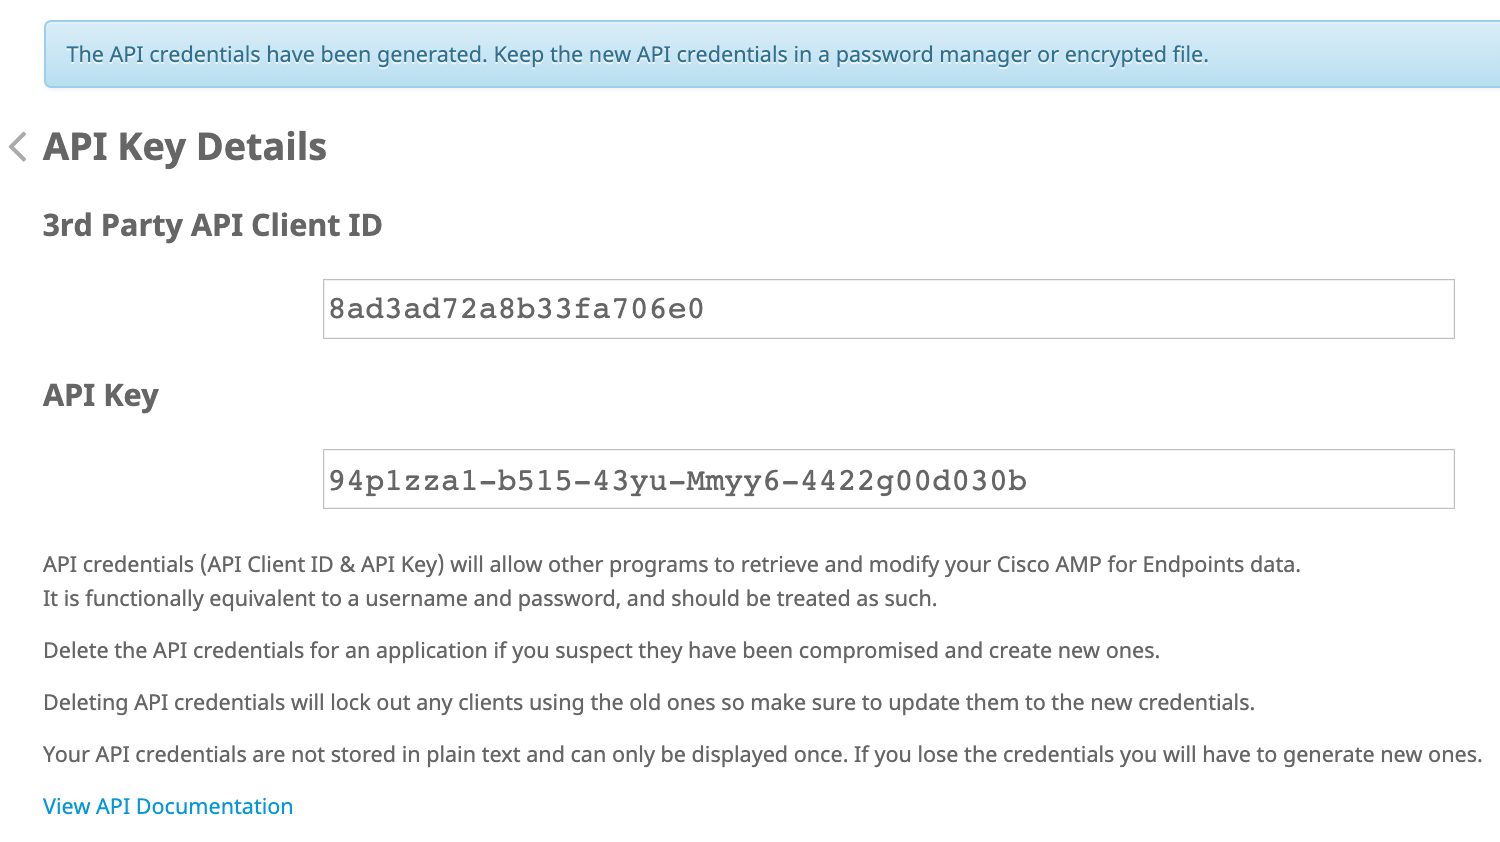 Cisco Secure Endpoint API Credential Information